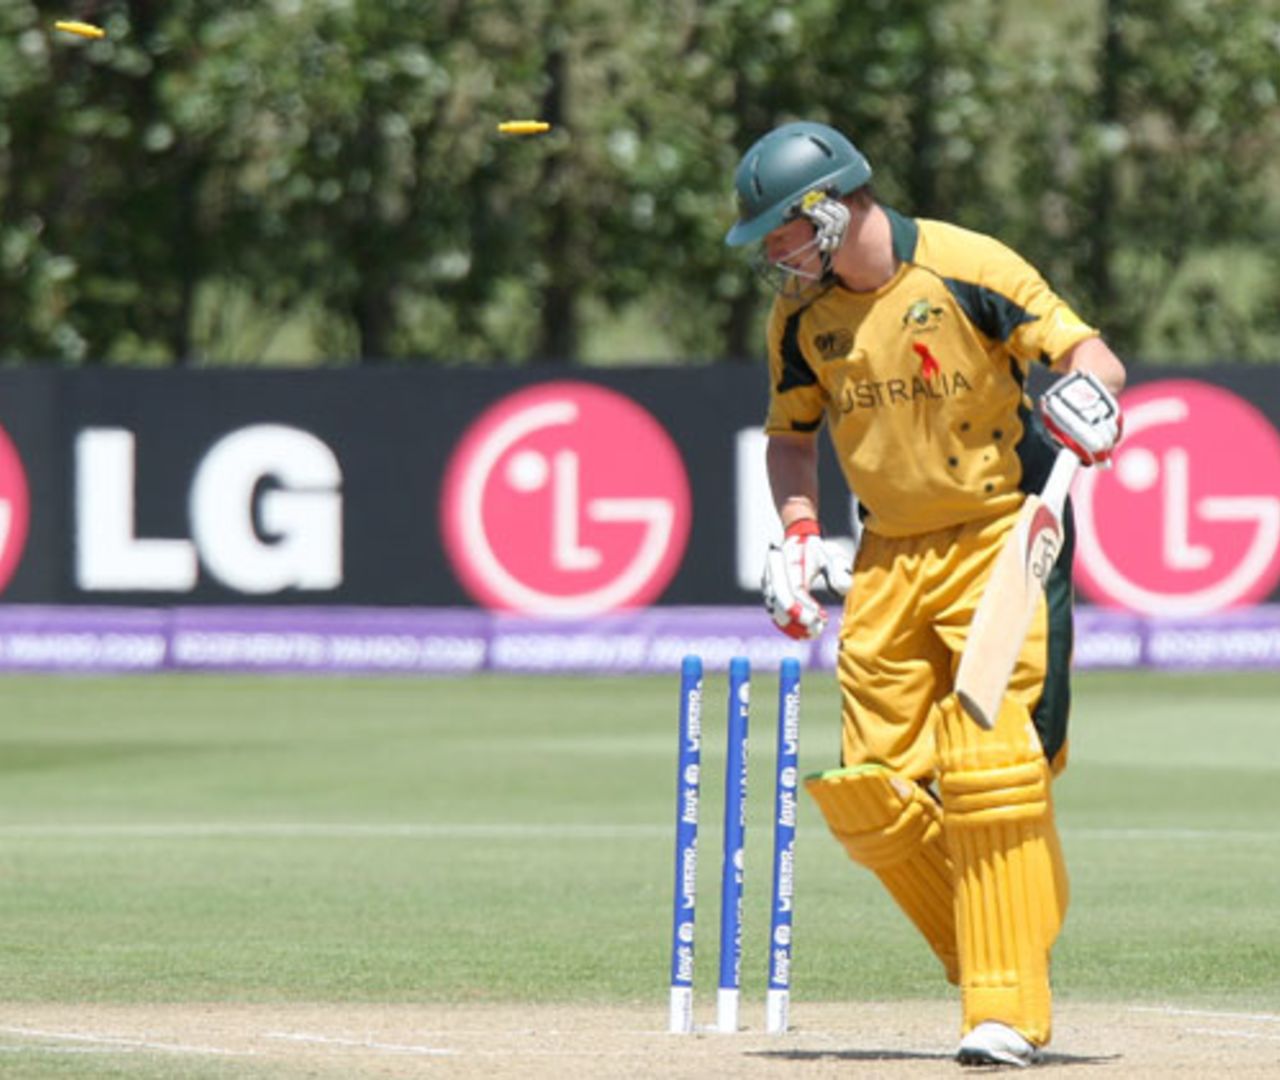 Tim Armstrong is bowled by Sarmad Bhatti, Australia v Pakistan, Under-19 World Cup final, Lincoln, 30 January, 2010